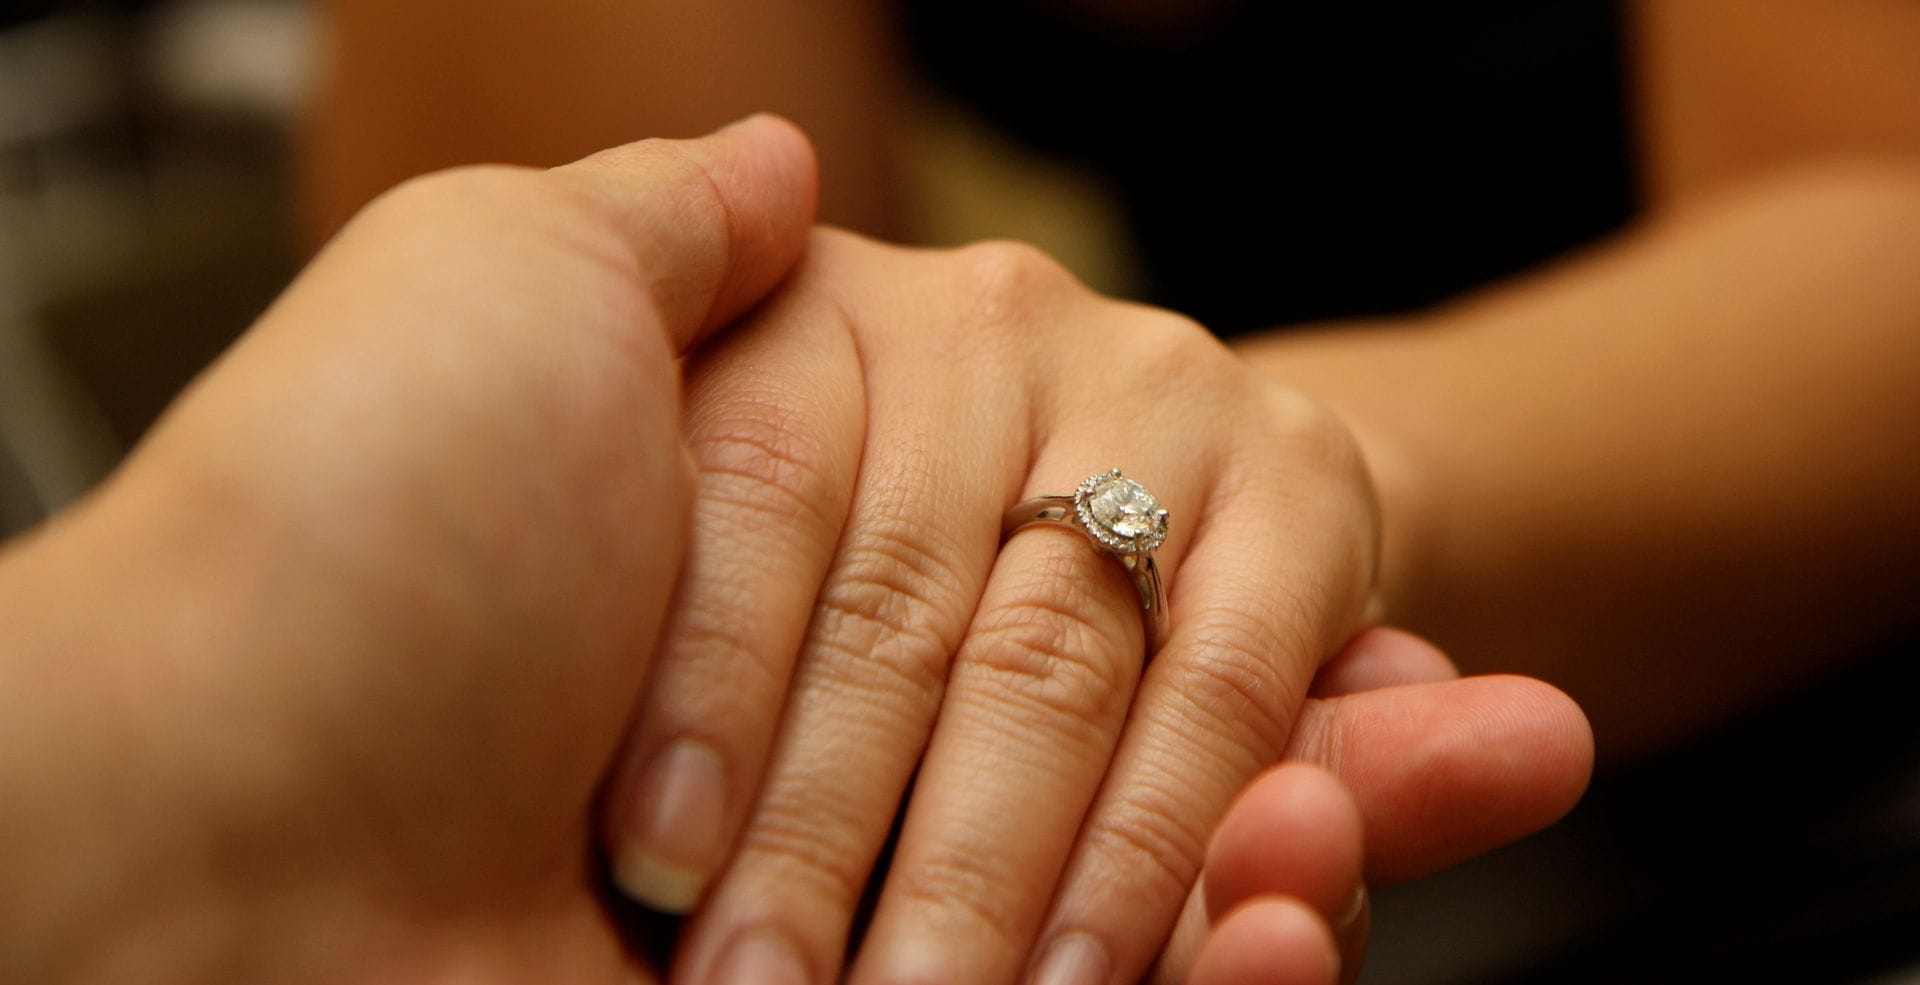 How to Buy an Engagement Ring Without Losing Your Mind or Blowing Your Budget